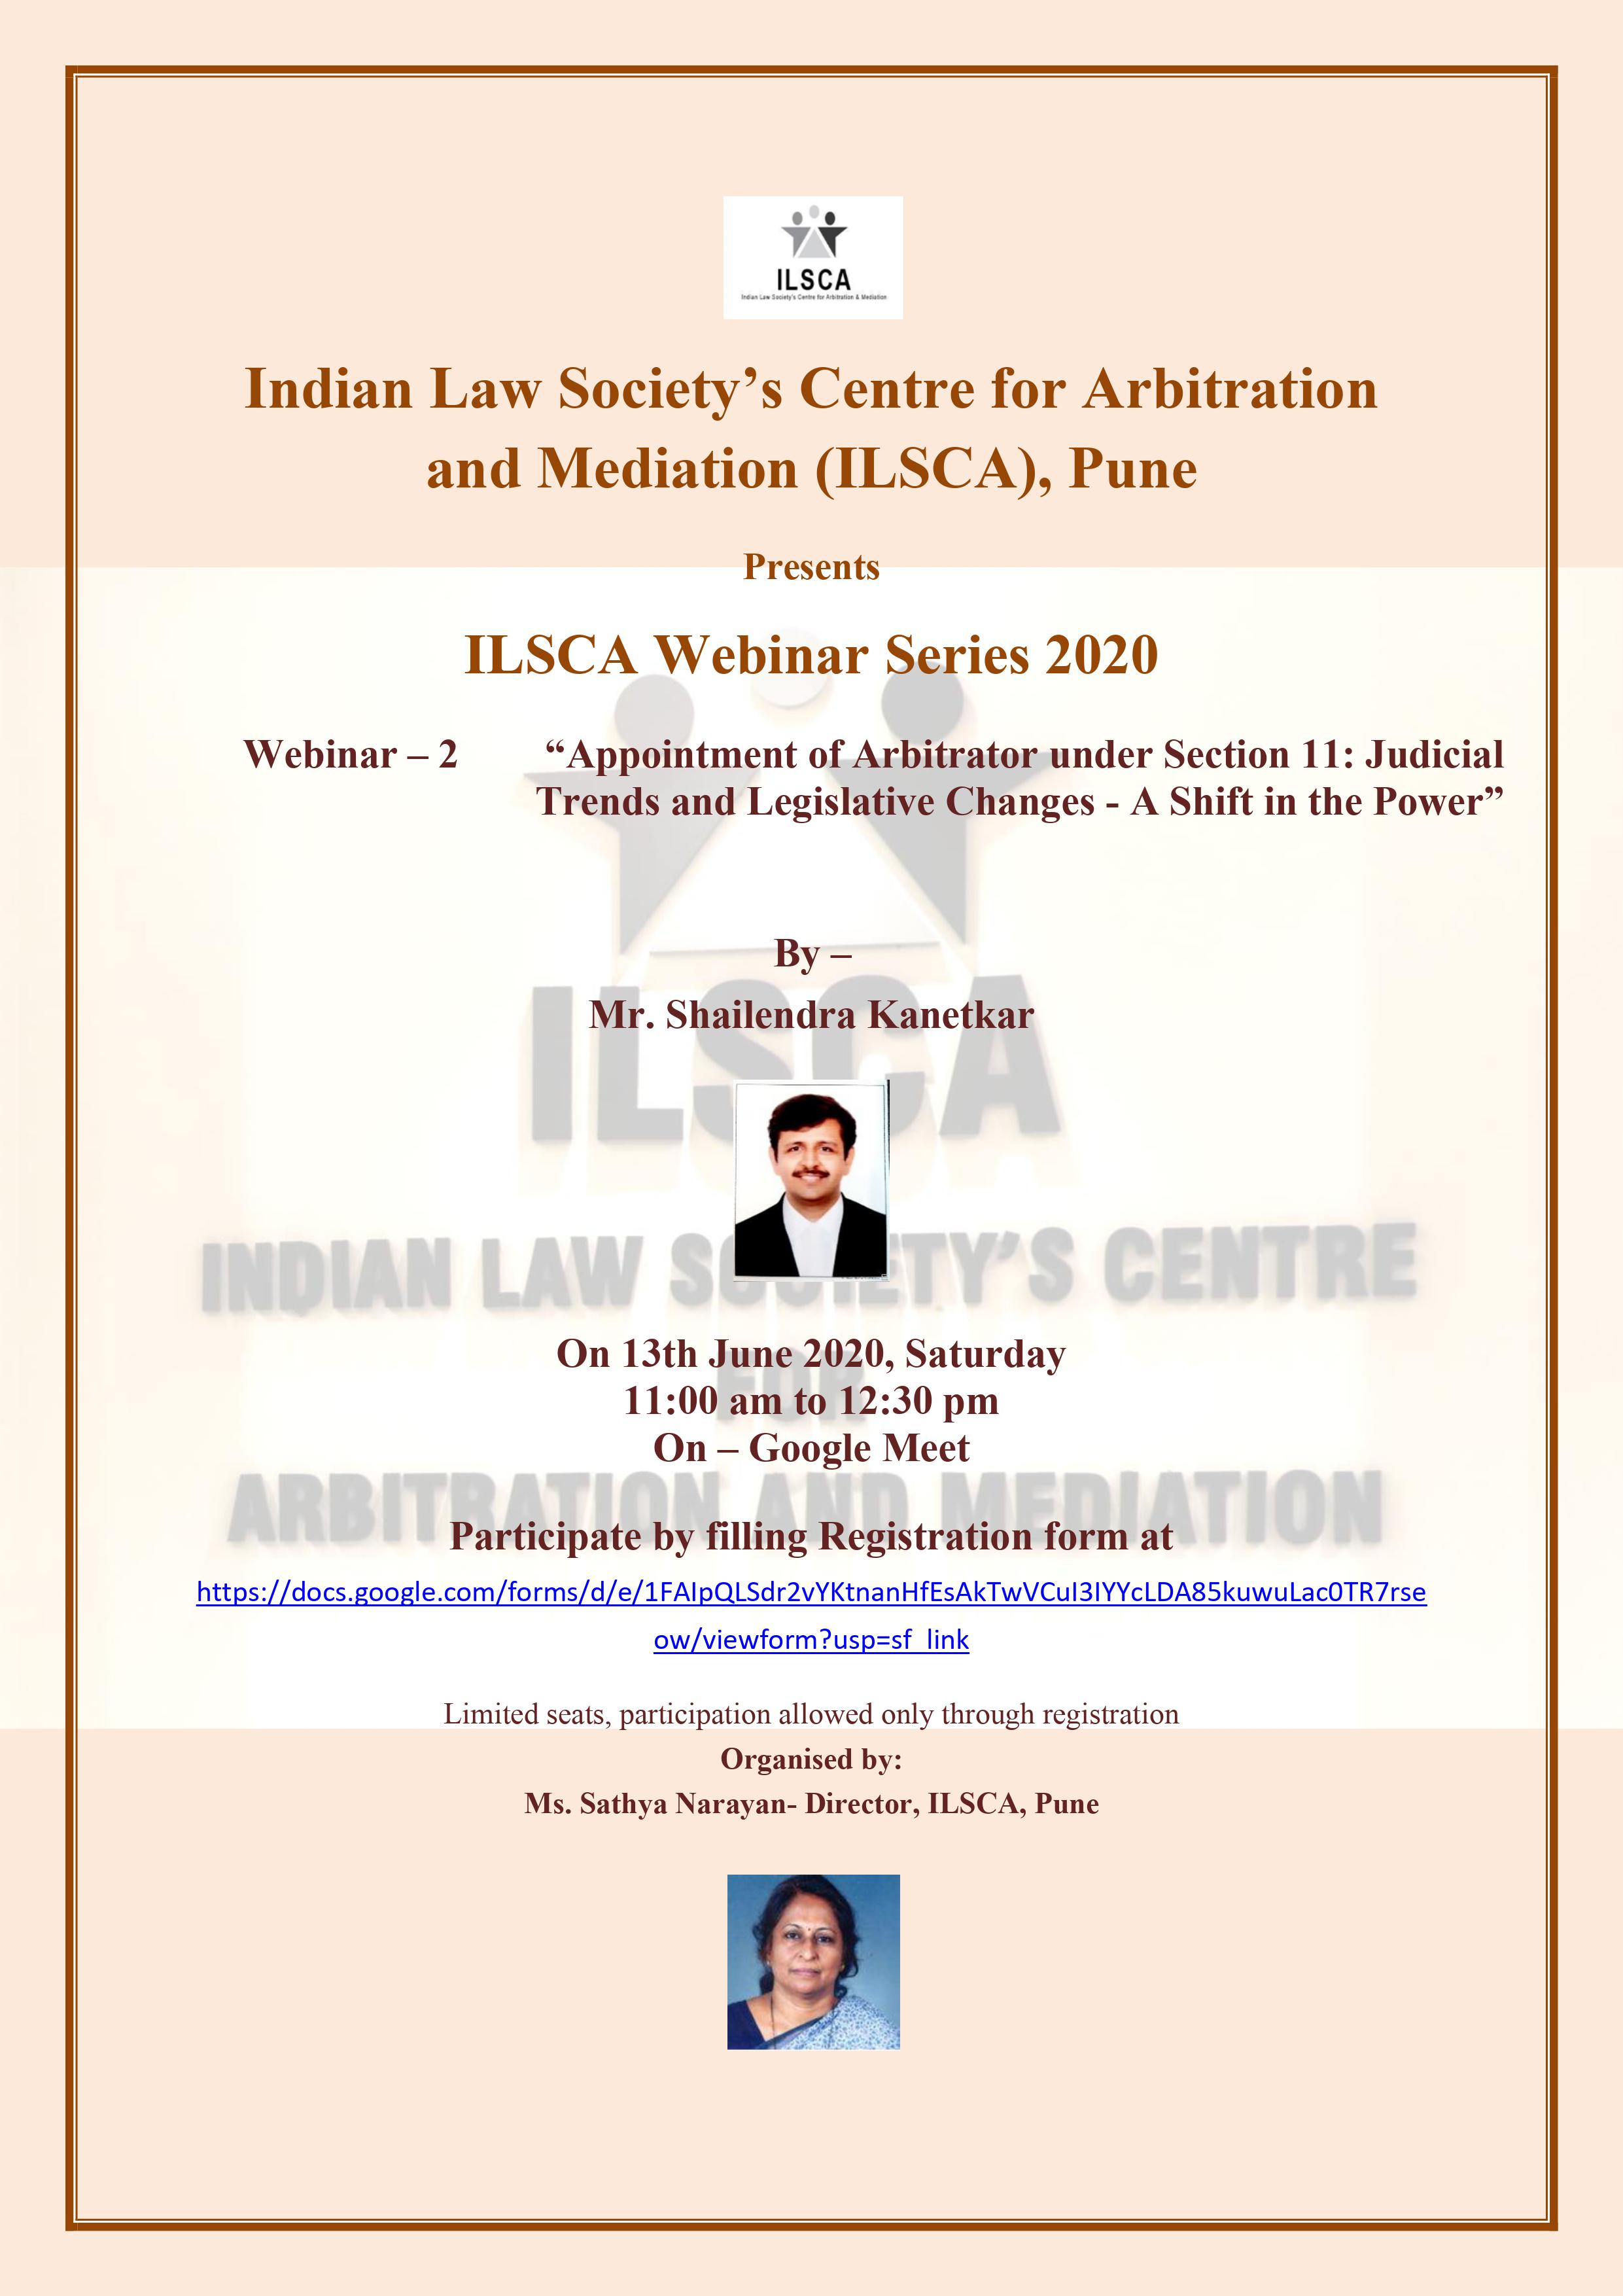 Appointment of Arbitrator under Section 11: Judicial Trends and Legislative Changes – A Shift in Power